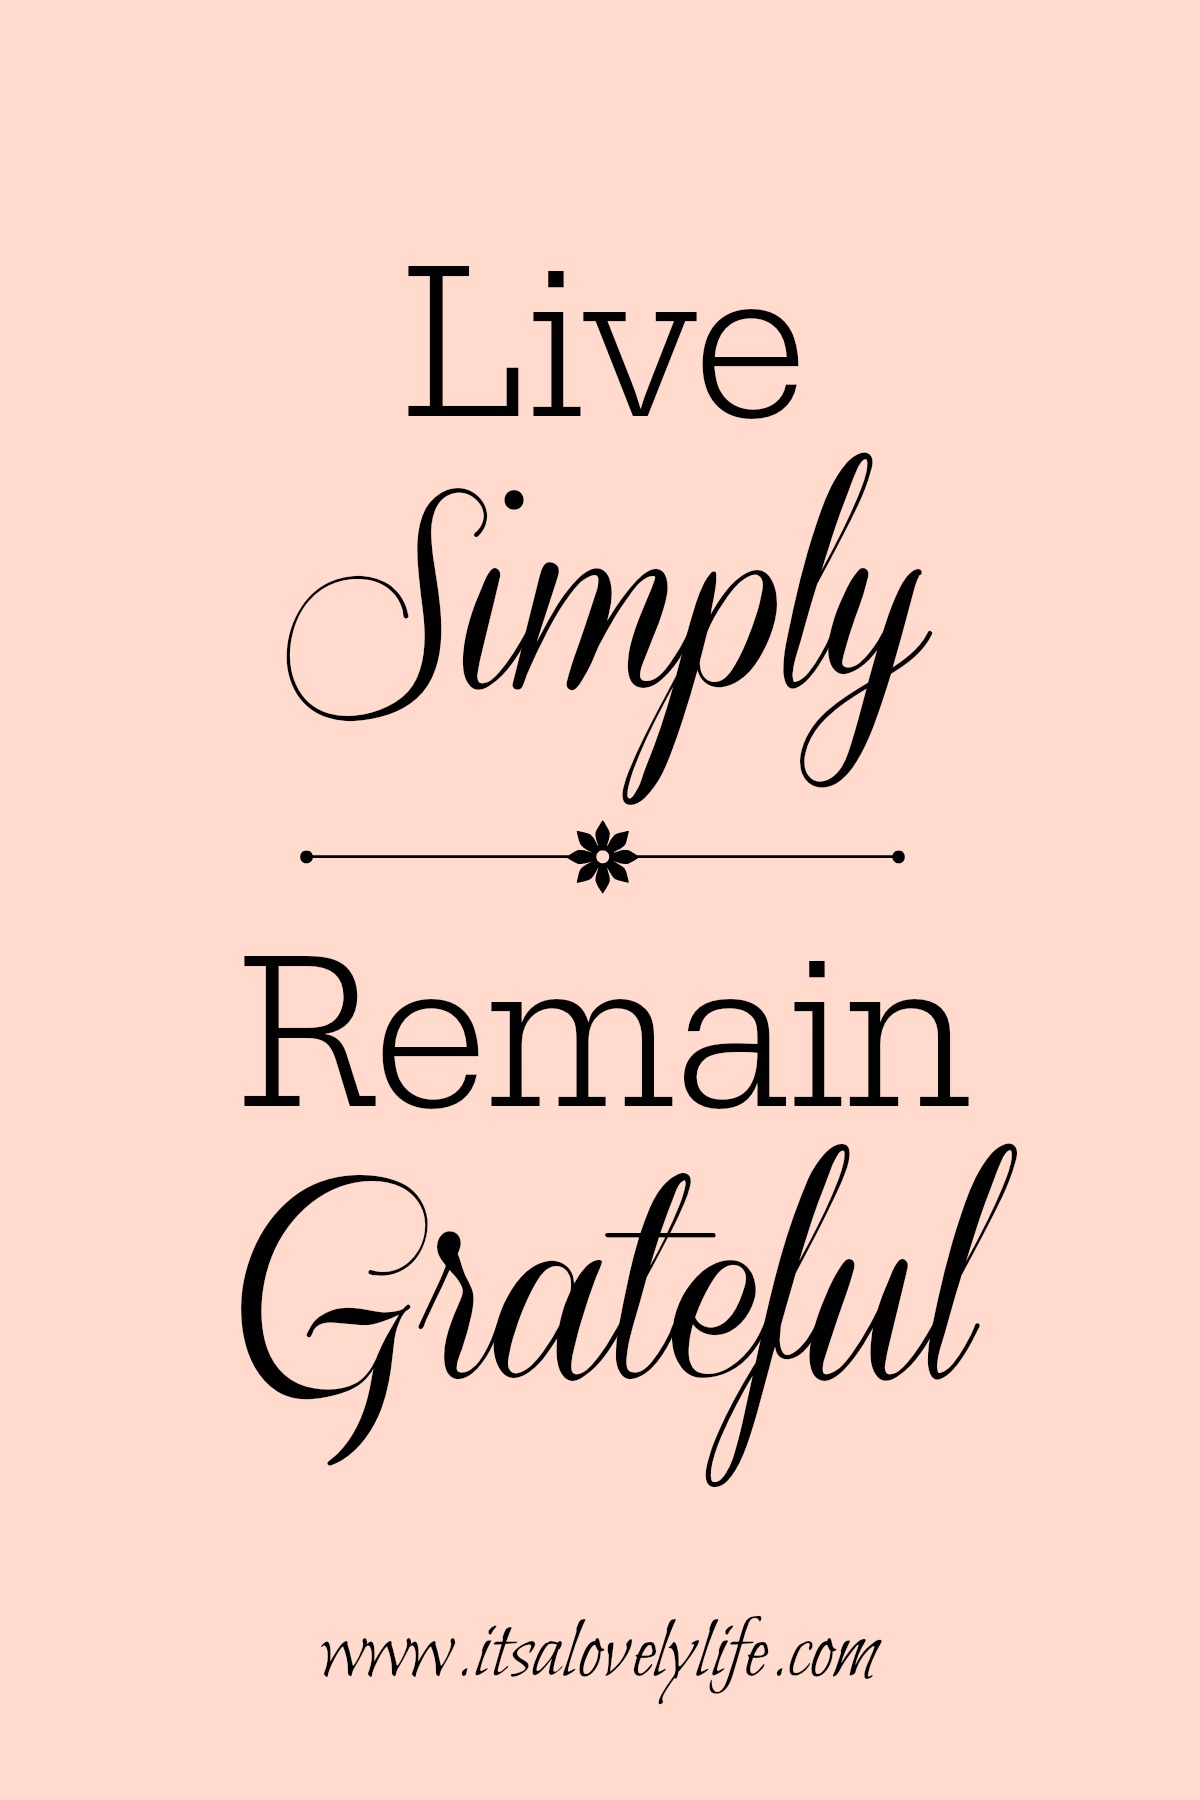 6 Lovely life quotes that most people can relate to The Source · Live Simply